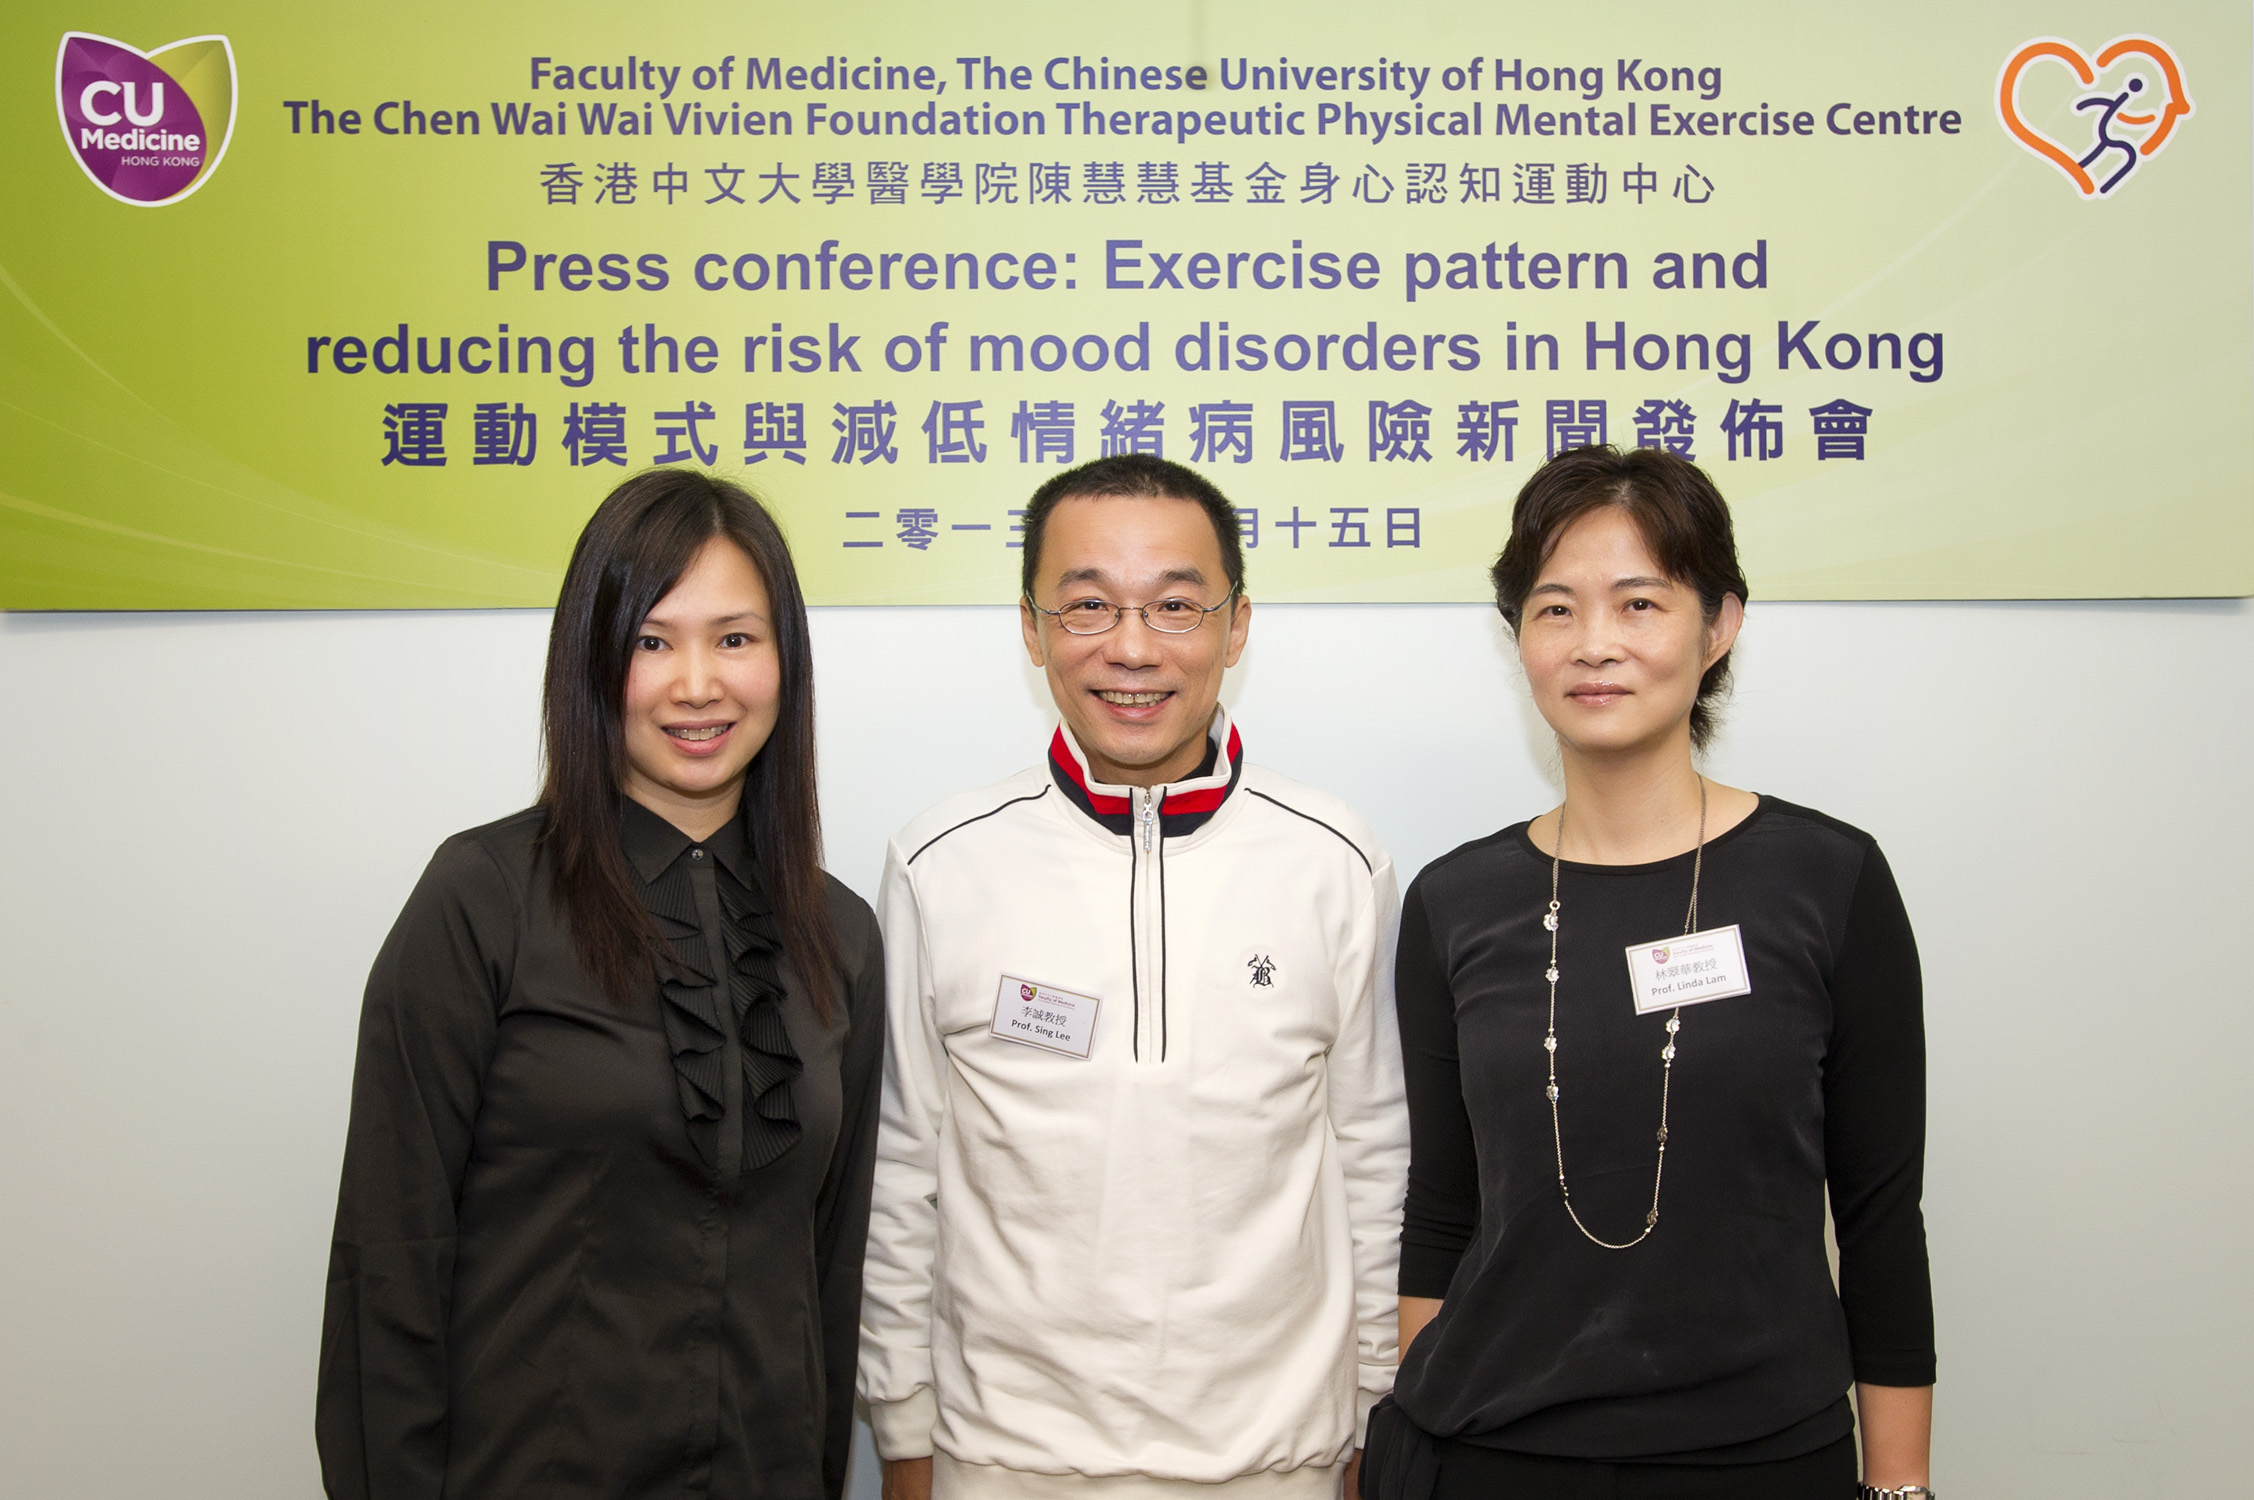 (From left) Ms. Belinda Yu, Registered Physician, CUHK; Prof. Sing Lee, Department of Psychiatry, CUHK; and Prof. Linda Lam, Principal Investigator and Director of The Chen Wai Wai Vivien Foundation Therapeutic Physical Mental Exercise Center; present their recent survey findings that regular mind-body exercise can reduce the risk of mood disorders.